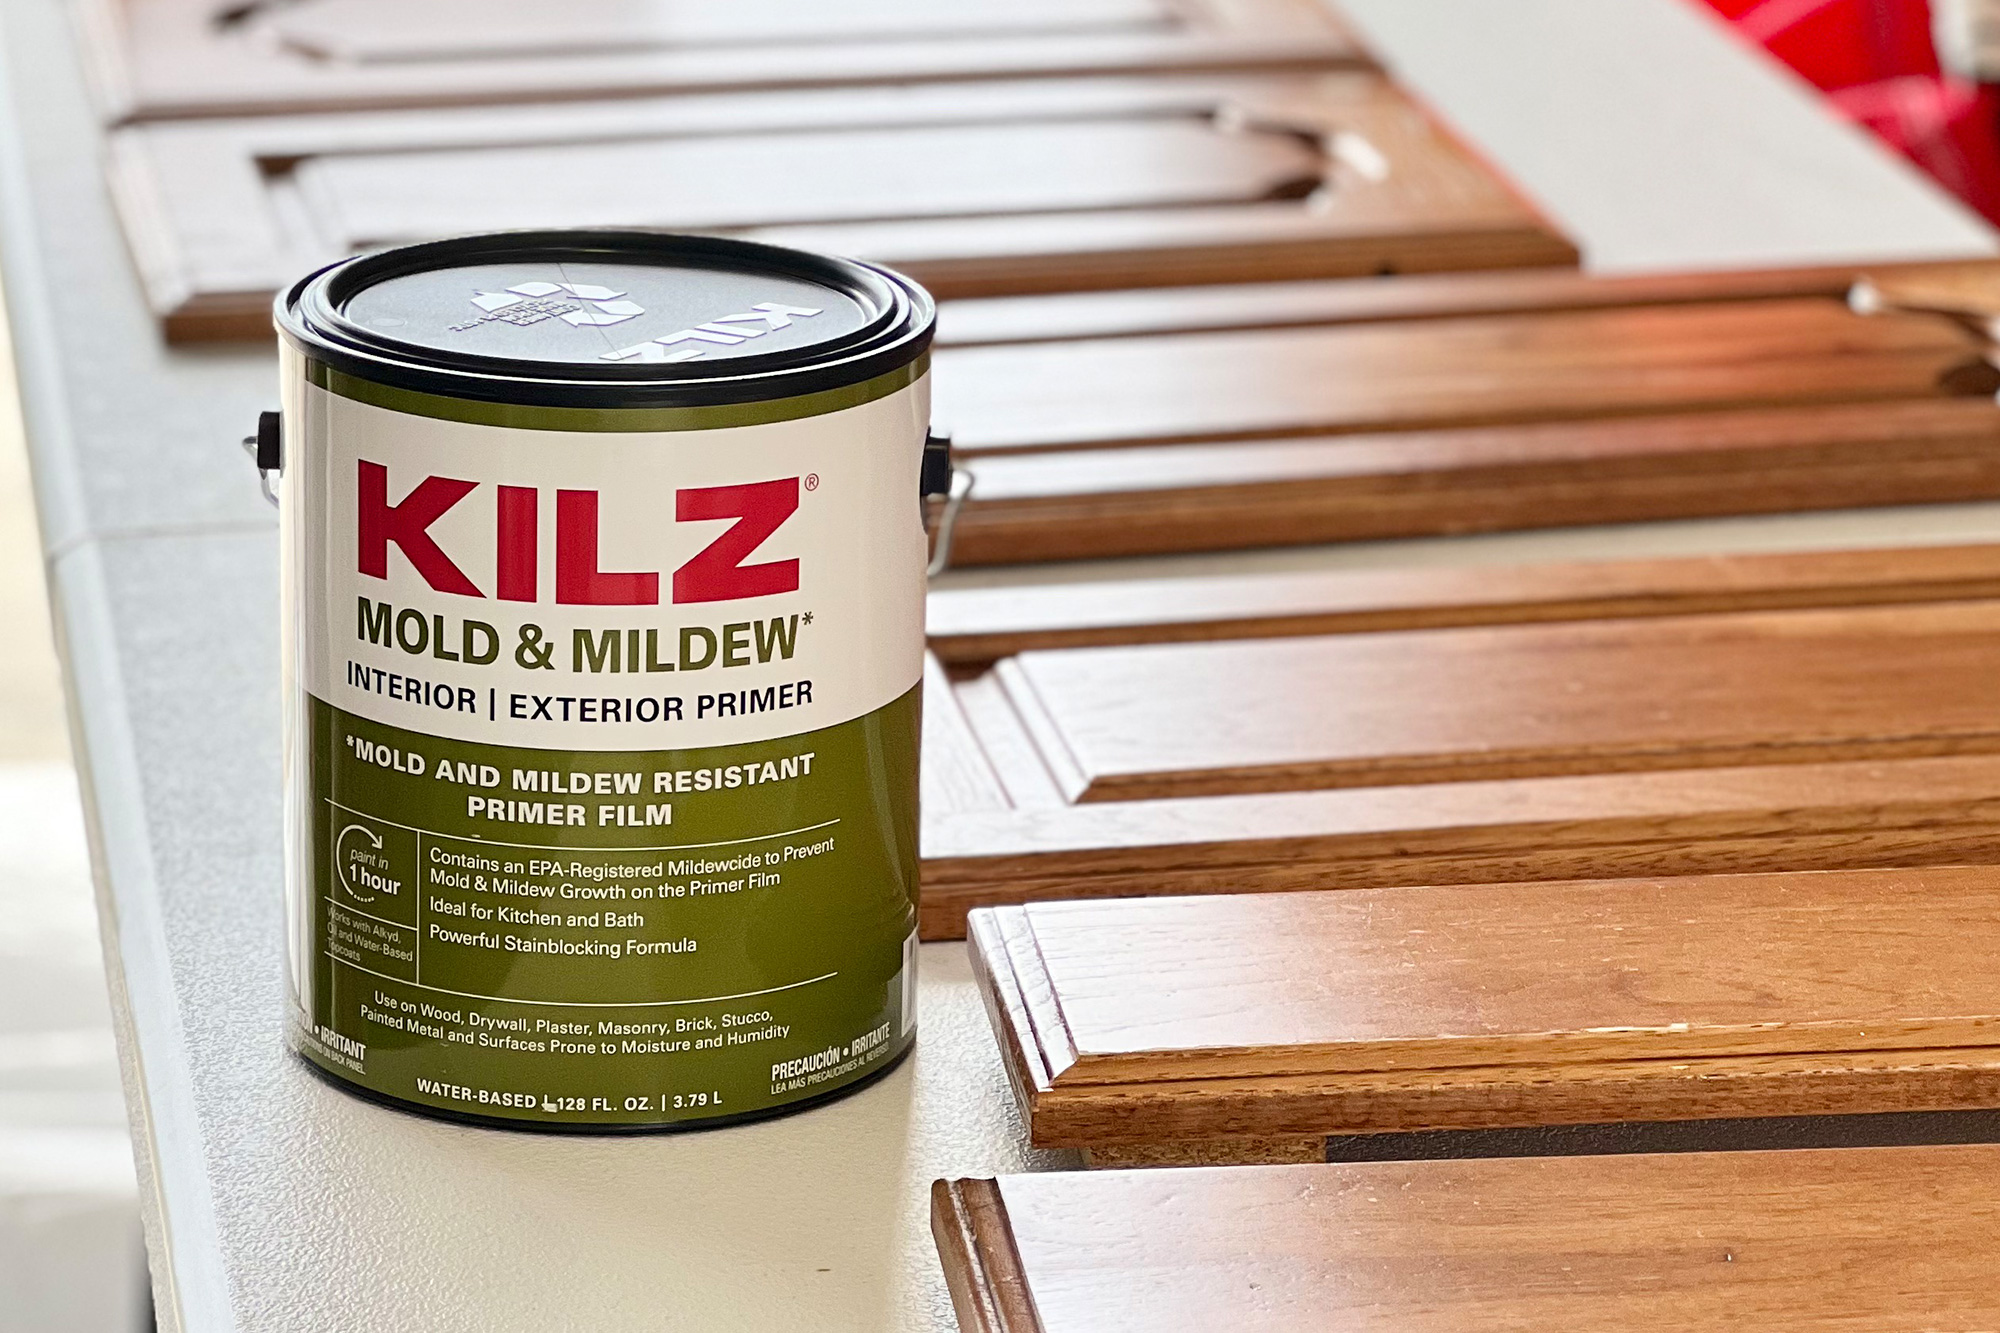 KILZ Mold & Mildew 1 gallon can next to wood cabinet doors on a table.